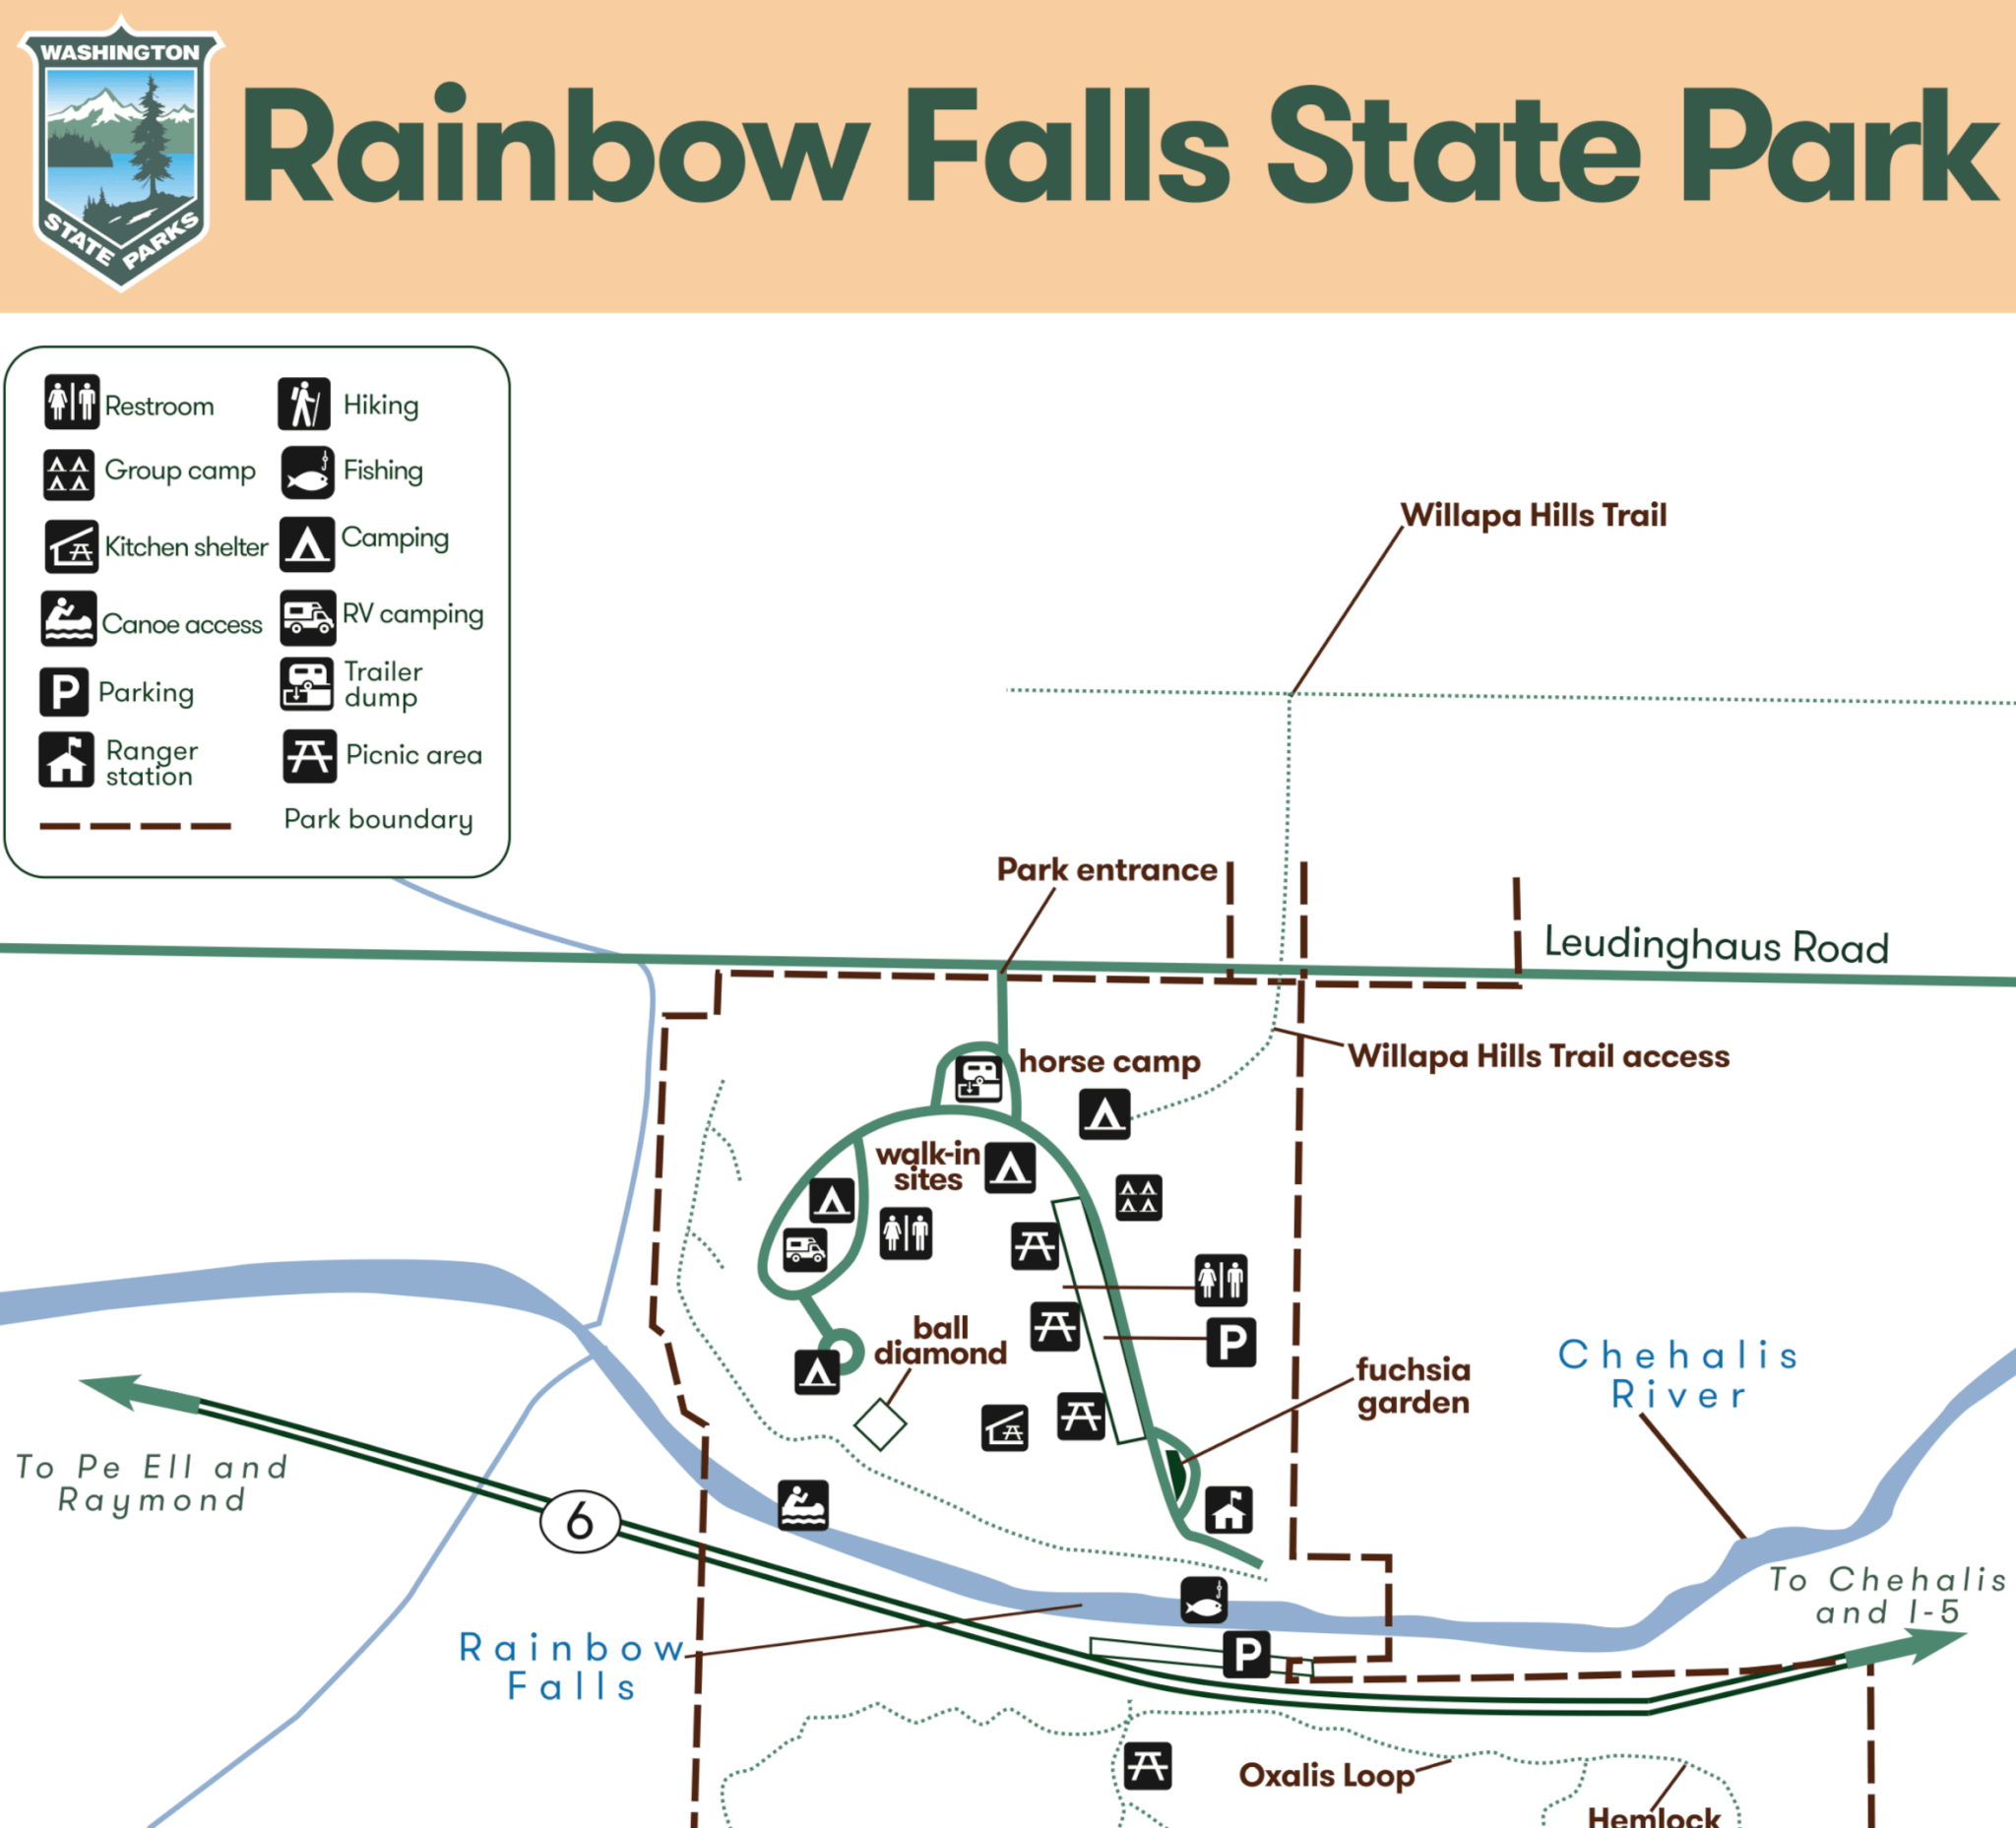 Rainbow Falls State Park - Campsite Photos, Info & Reservations